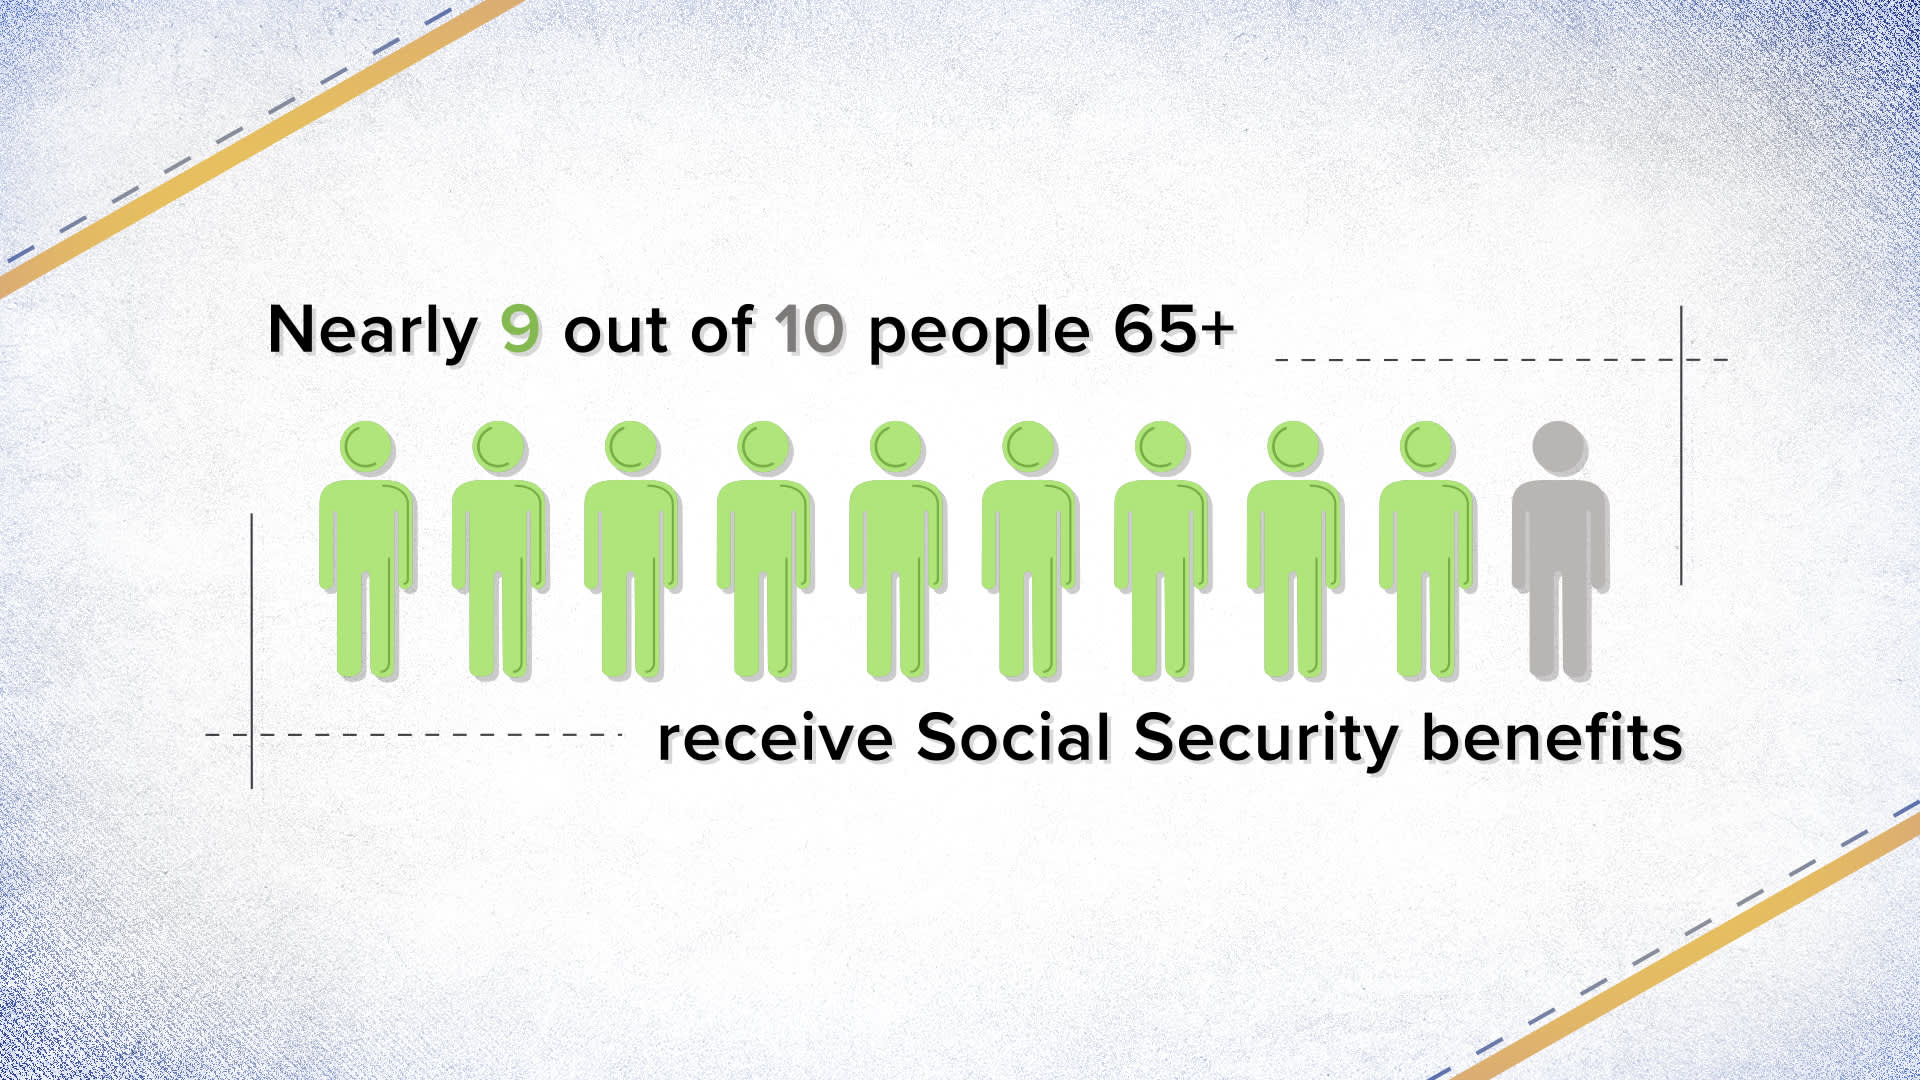 How much your Social Security check will be if you make 45,000 per